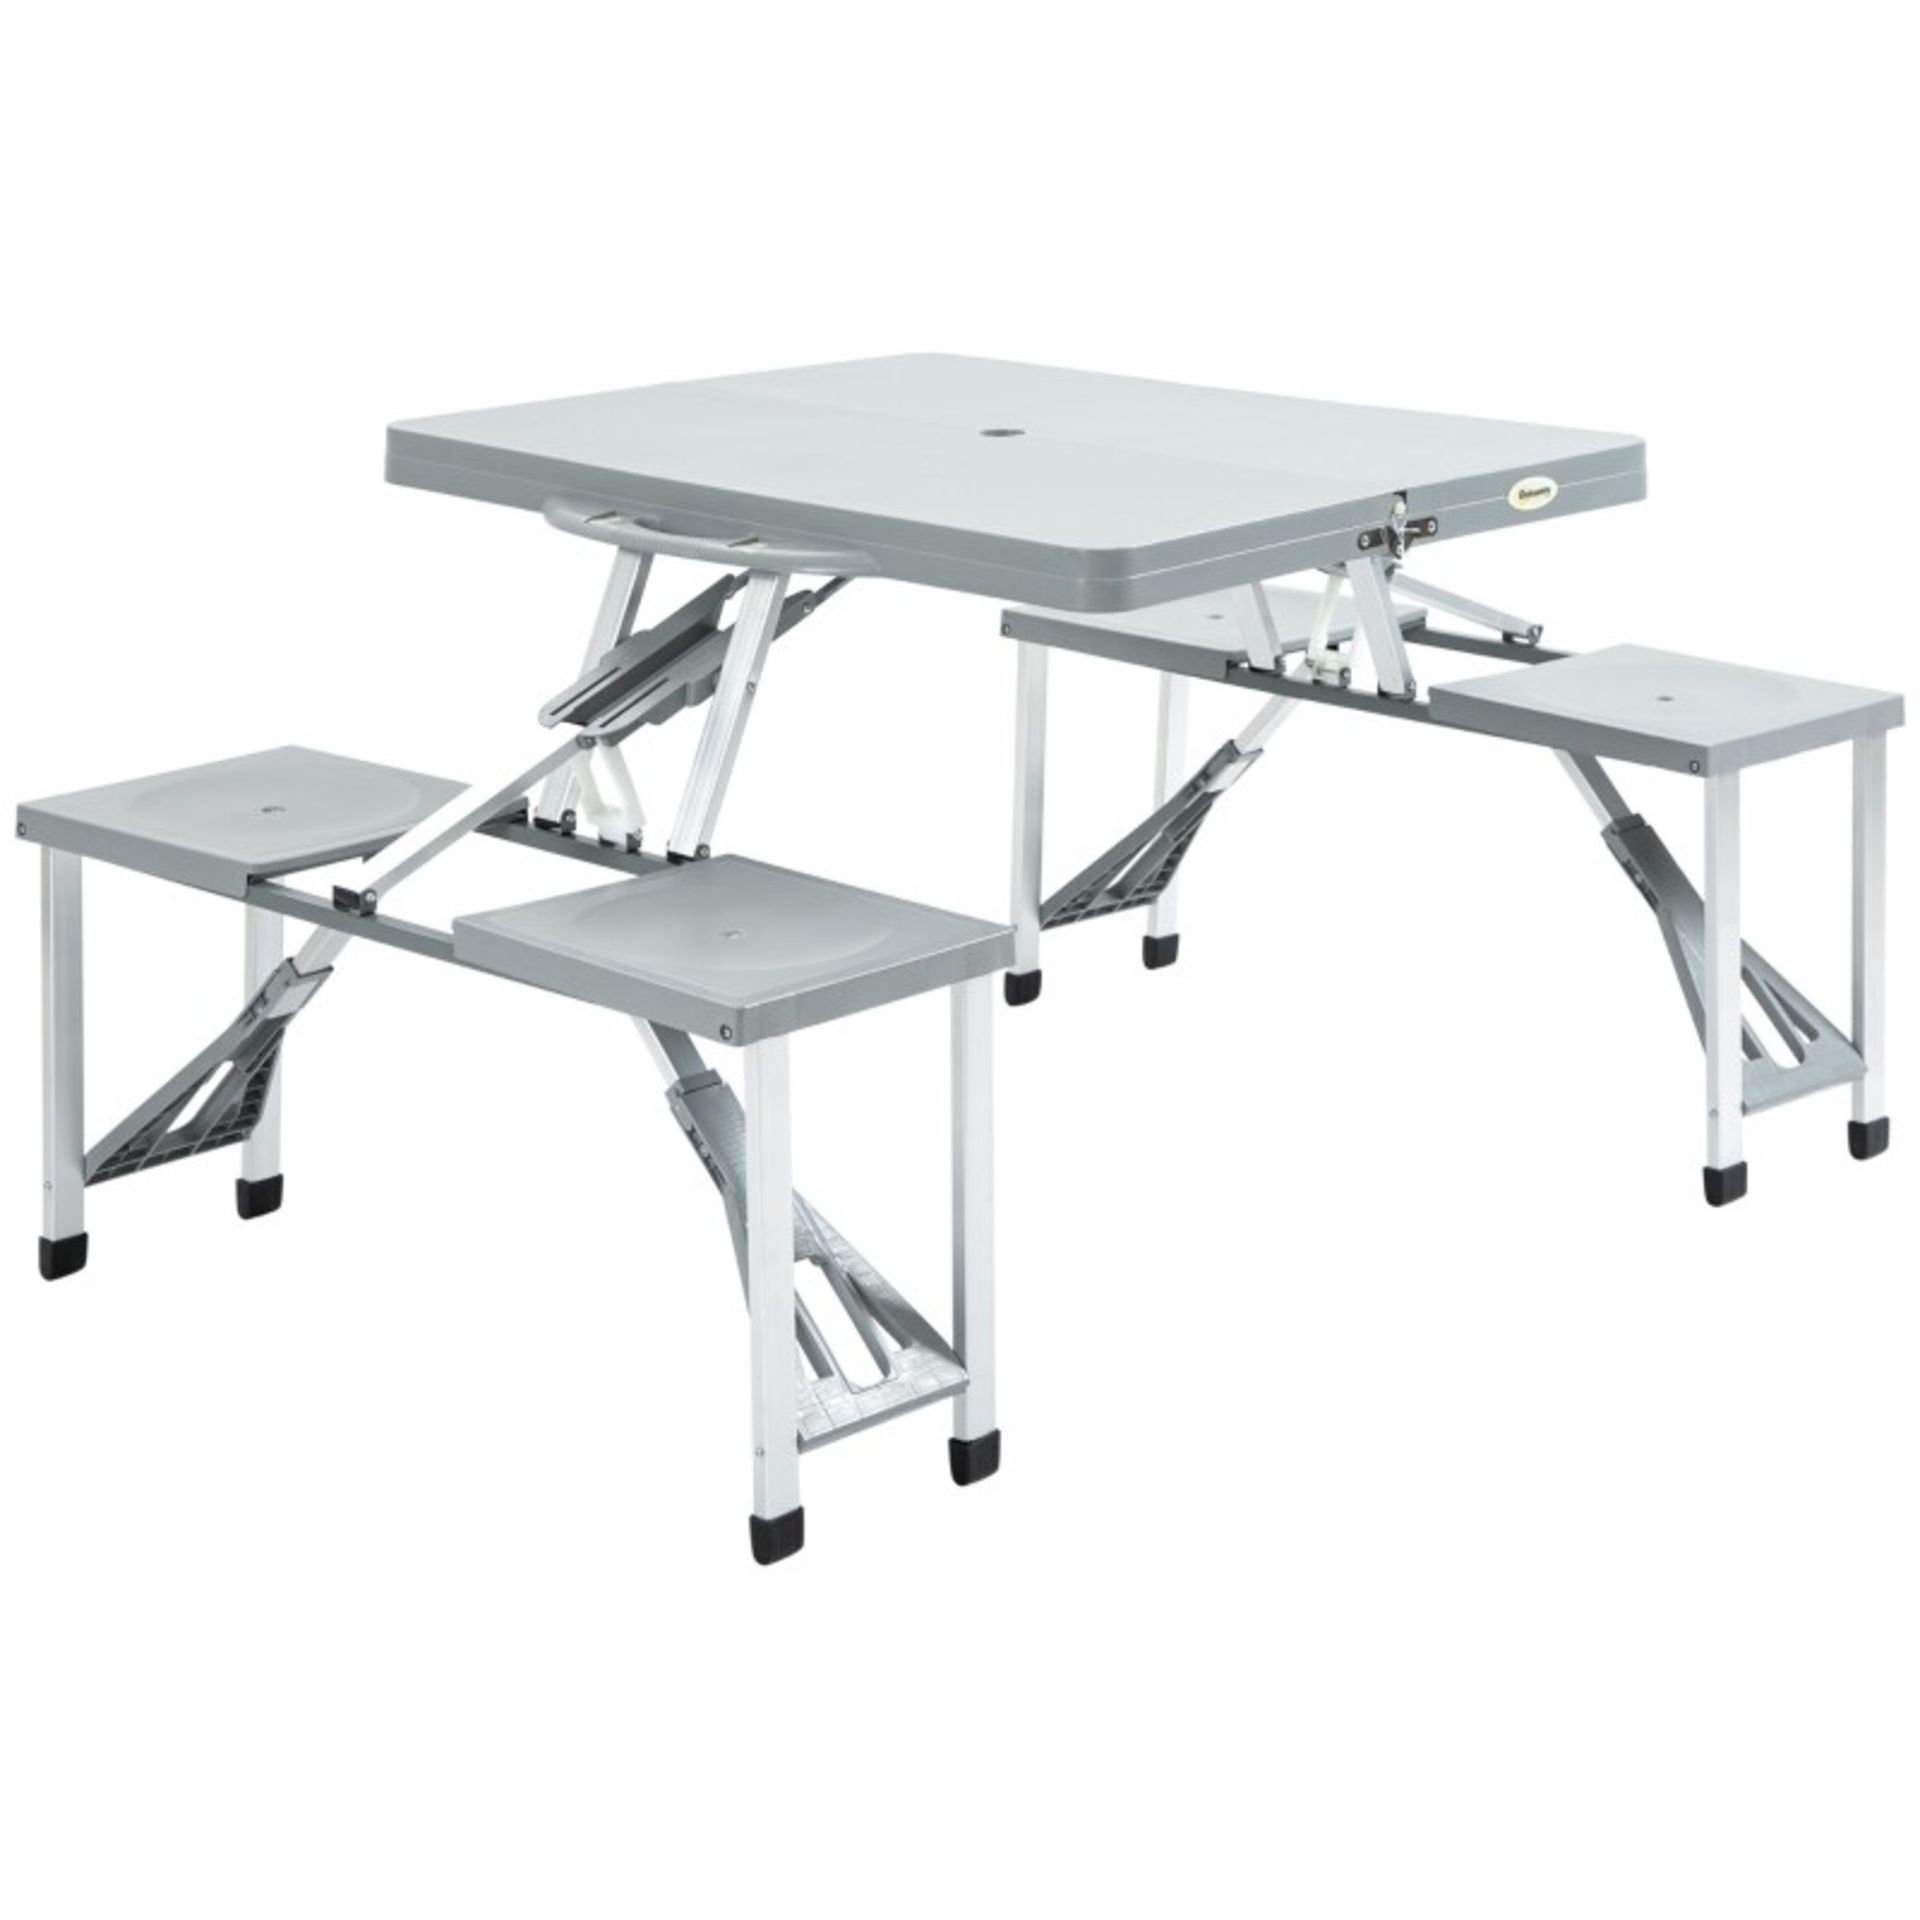 RRP £69.99 - Aluminium PP 4-Seater Portable Picnic Table and Bench Set Silver